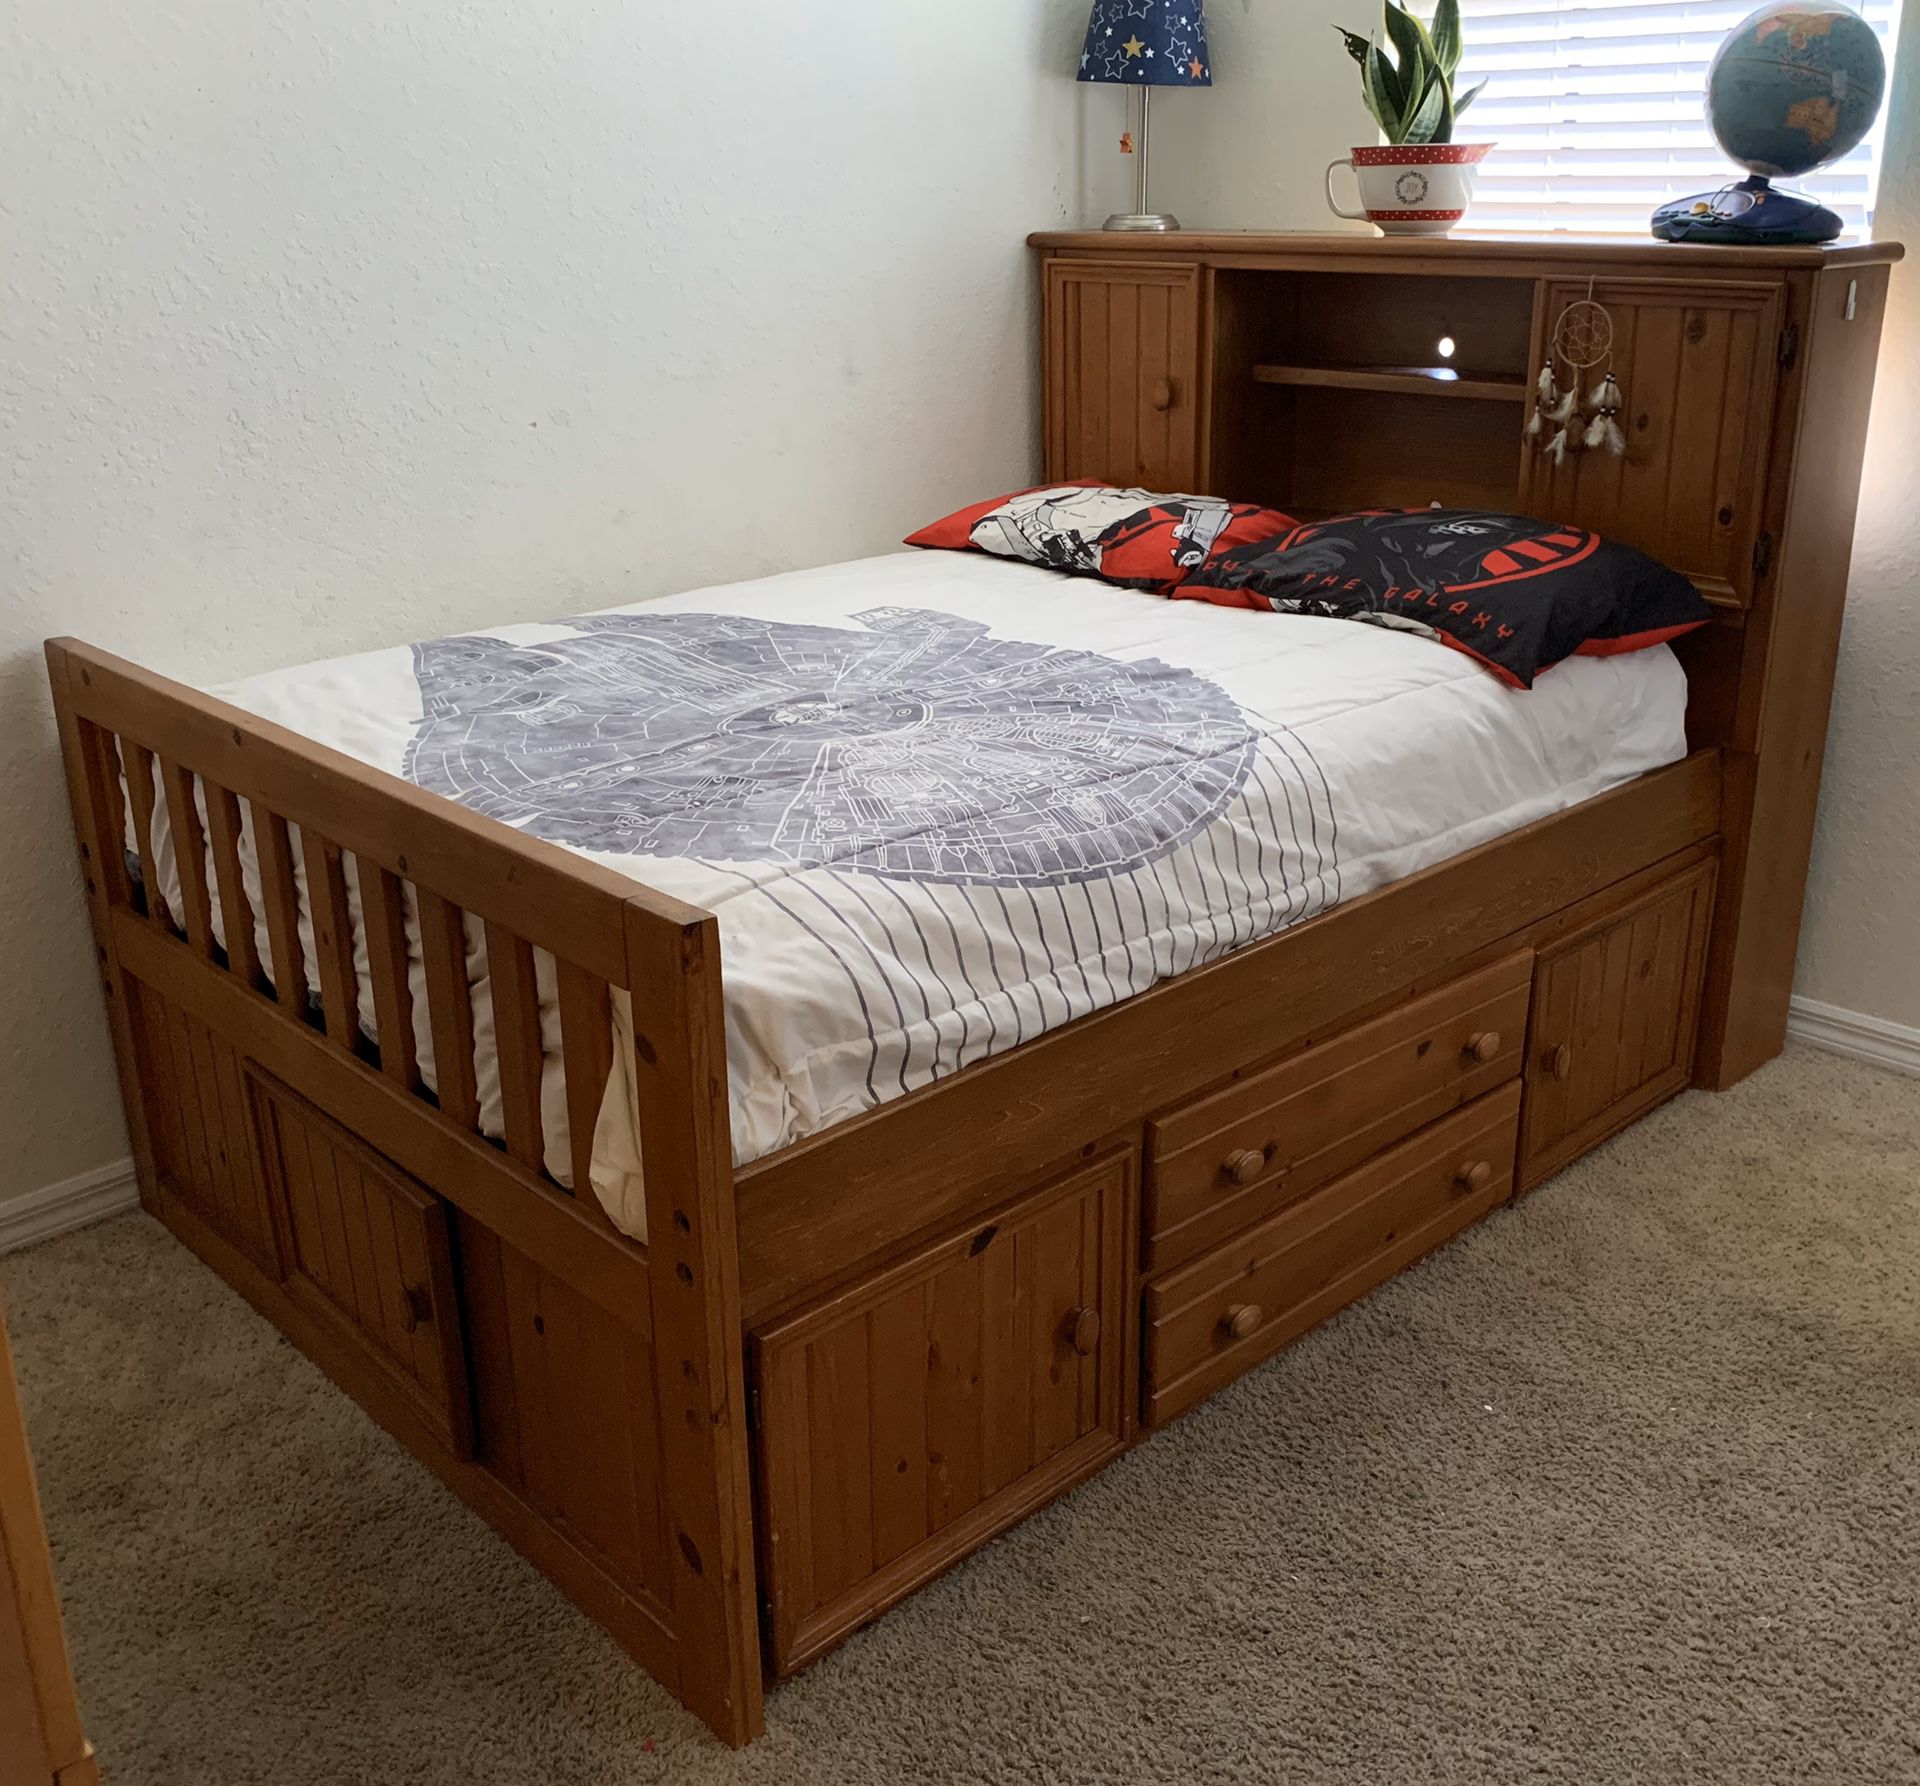 Full size captains bed with drawers and two book shelves